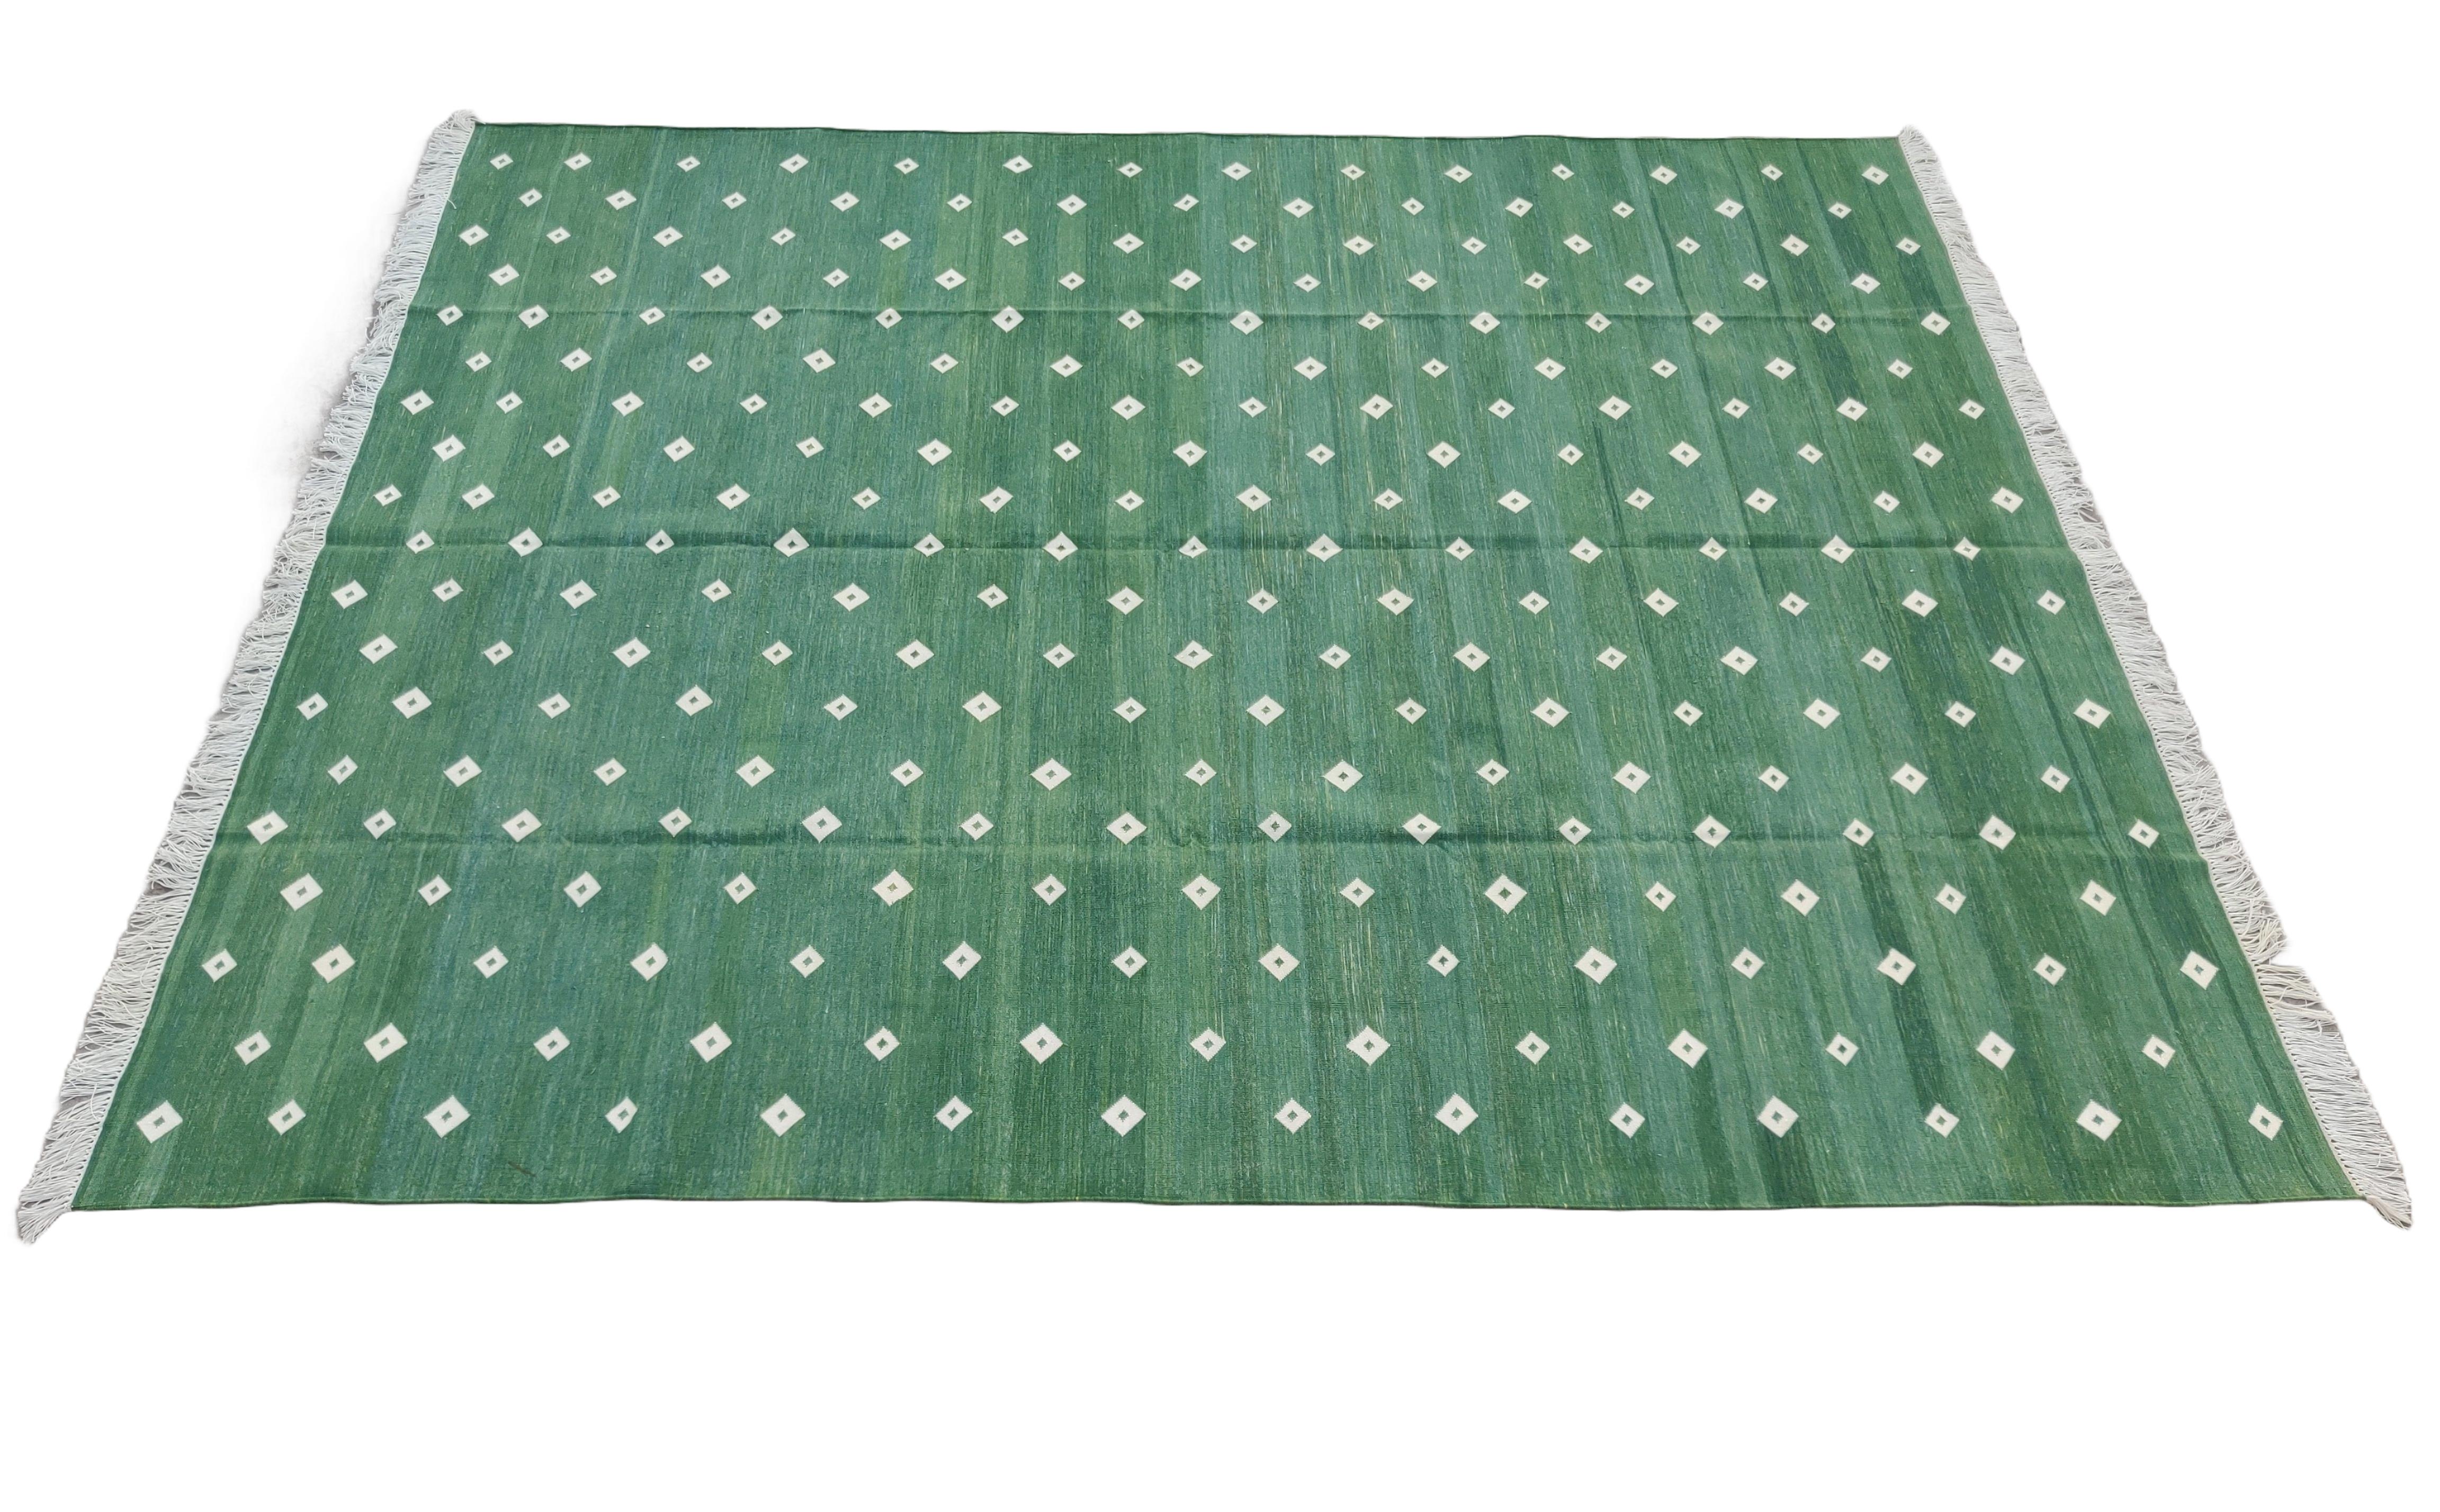 Mid-Century Modern Handmade Cotton Area Flat Weave Rug, 8x10 Green And White Diamond Indian Dhurrie For Sale